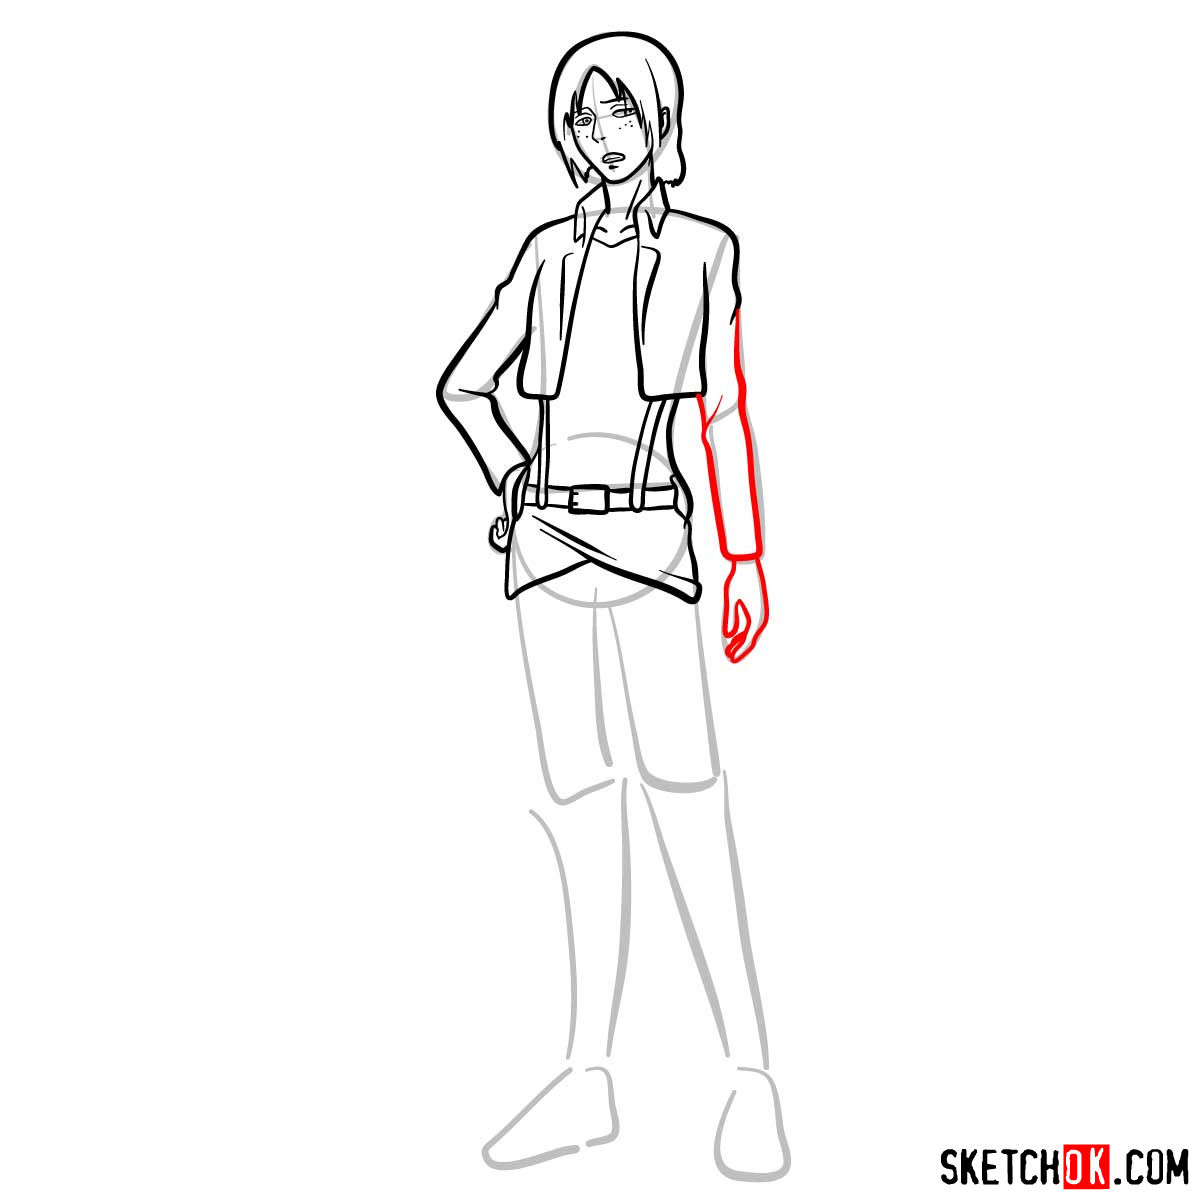 How to draw Ymir from Attack on Titan - step 10